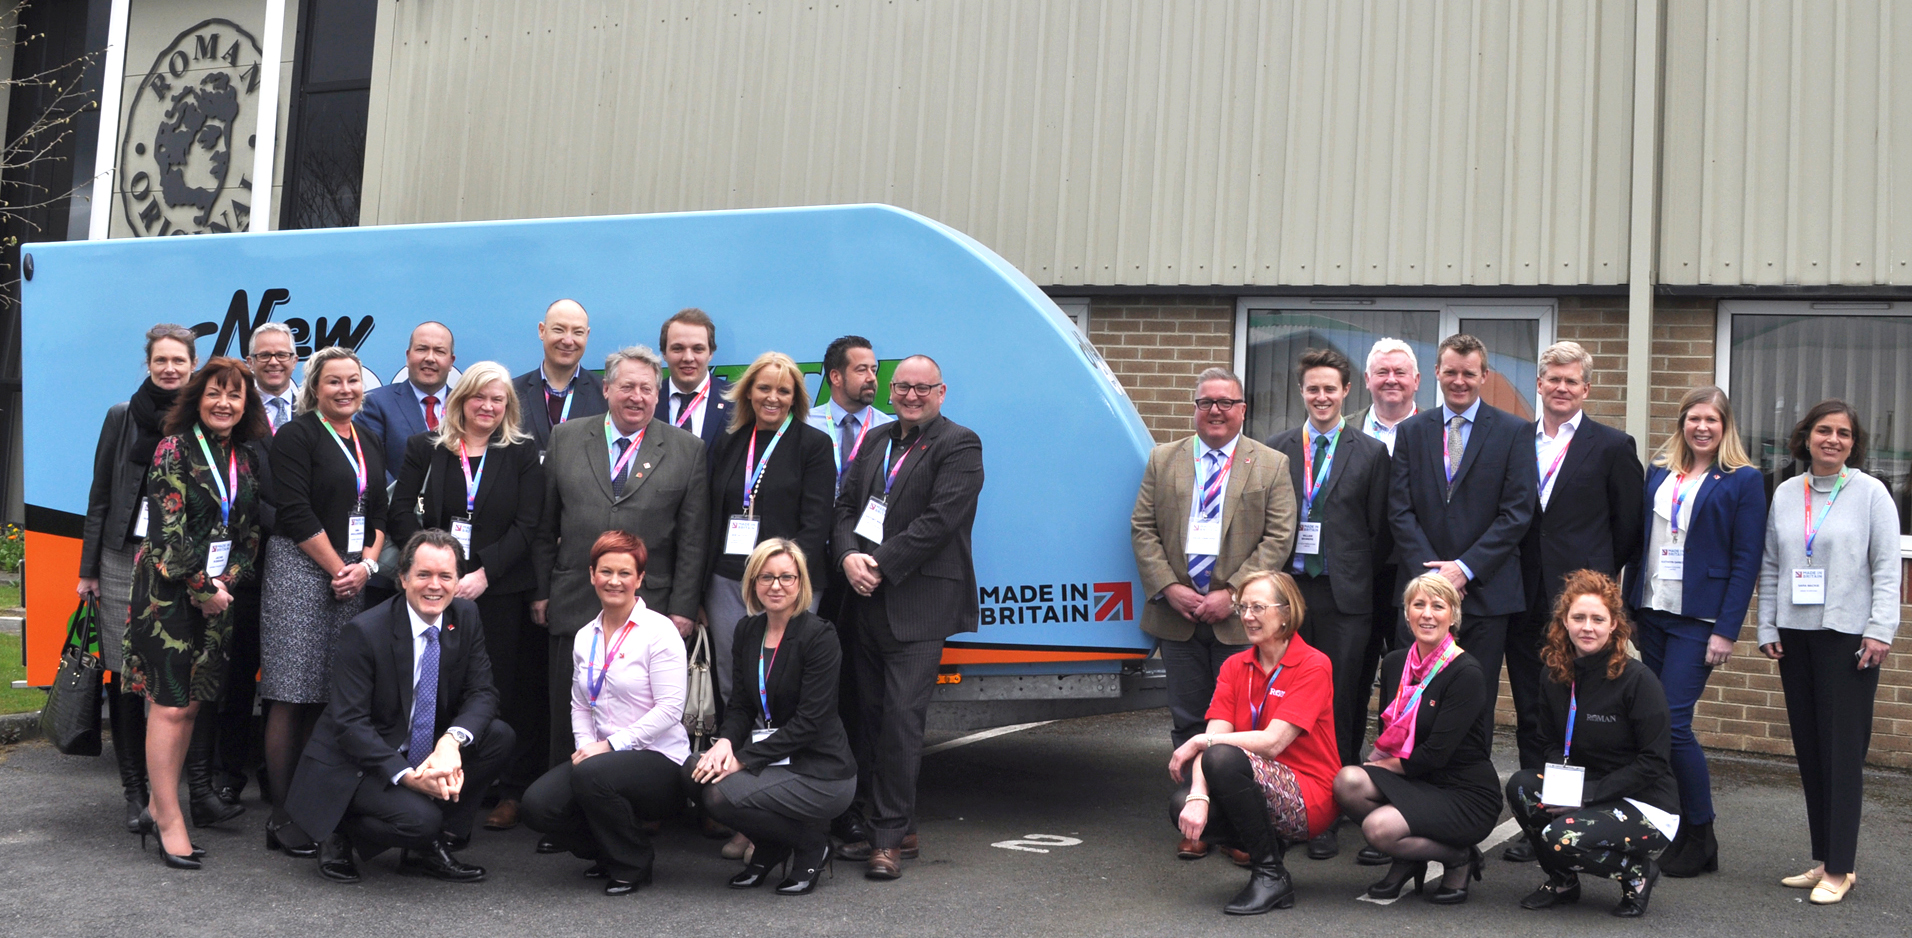 British Manufacturers Hold Marketing Meeting in Aycliffe